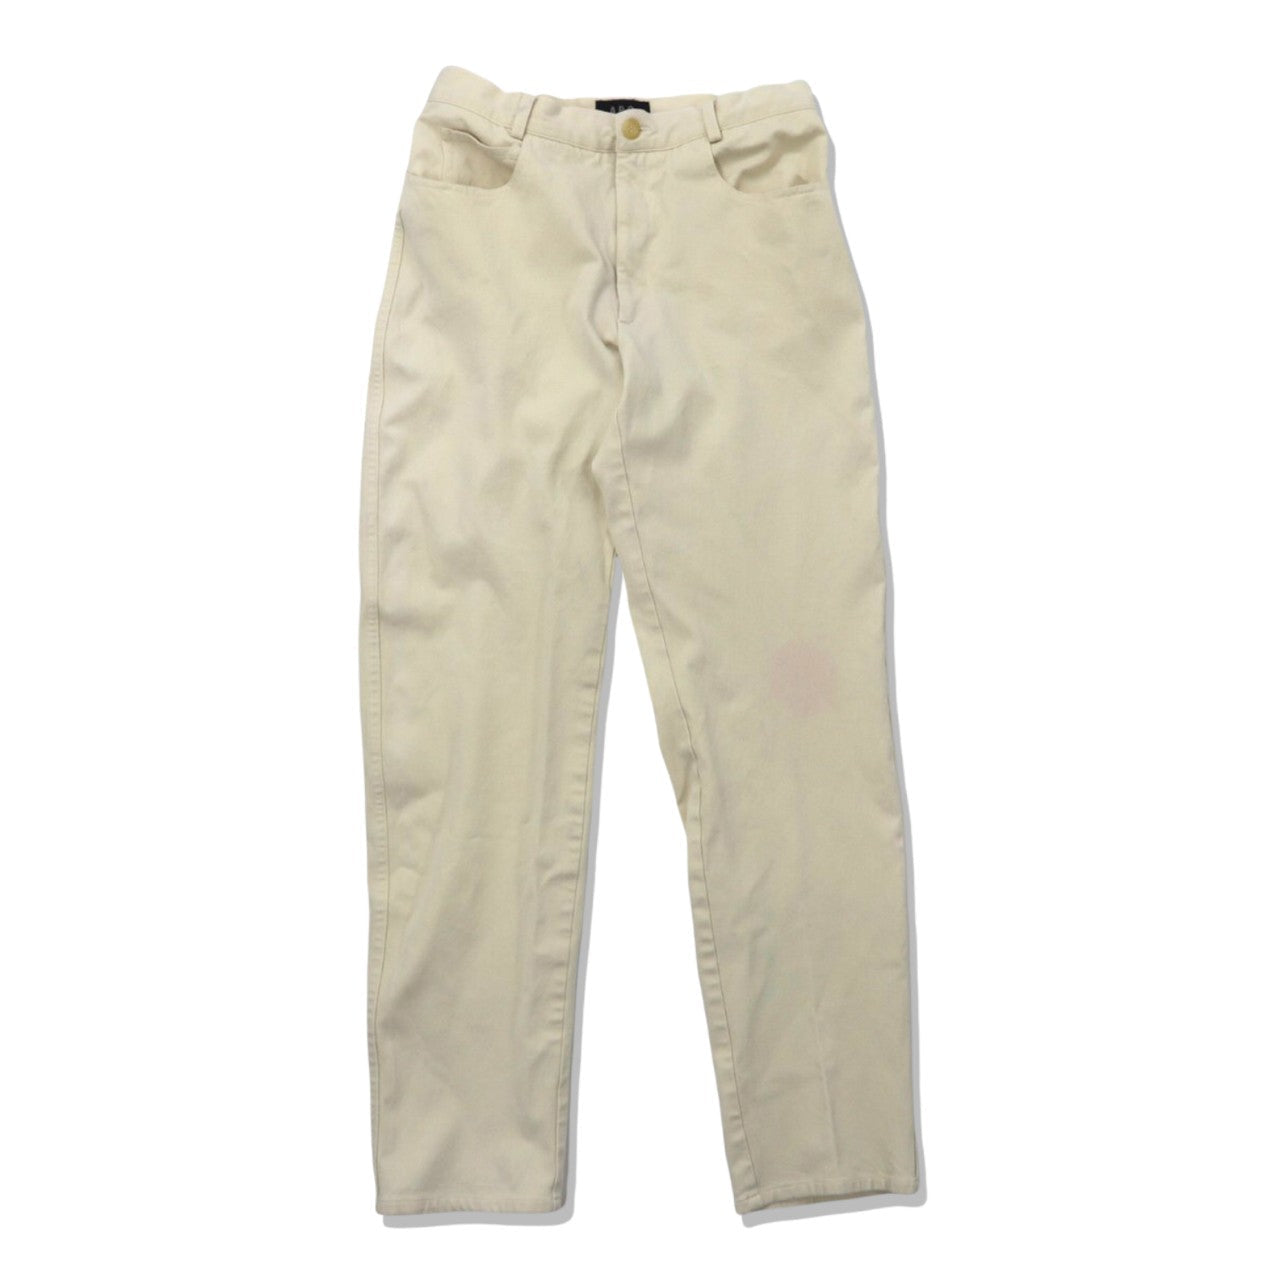 A.P.C. Skinny Pants M Beige Cotton Stretch Made in France – 日本然 